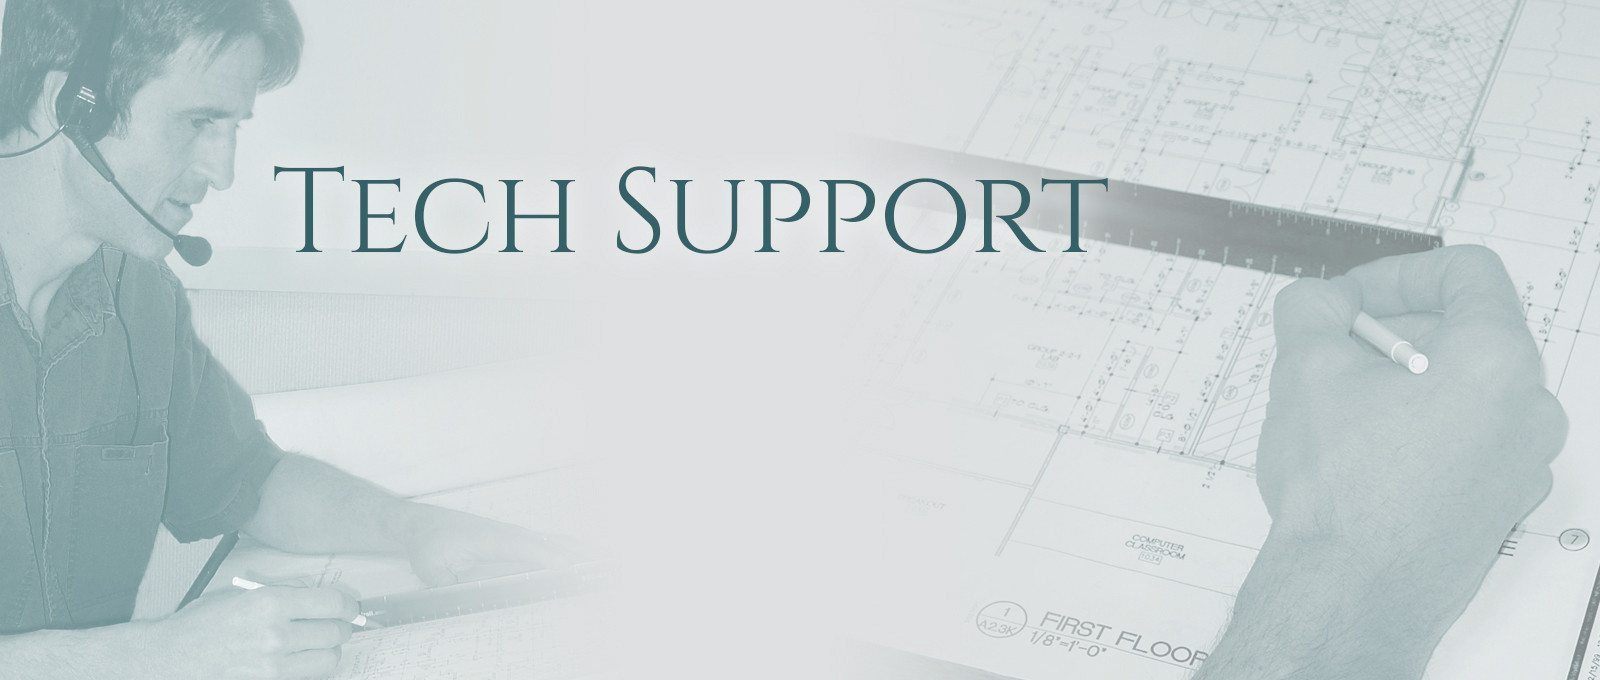 Tech support from Innovative Openings